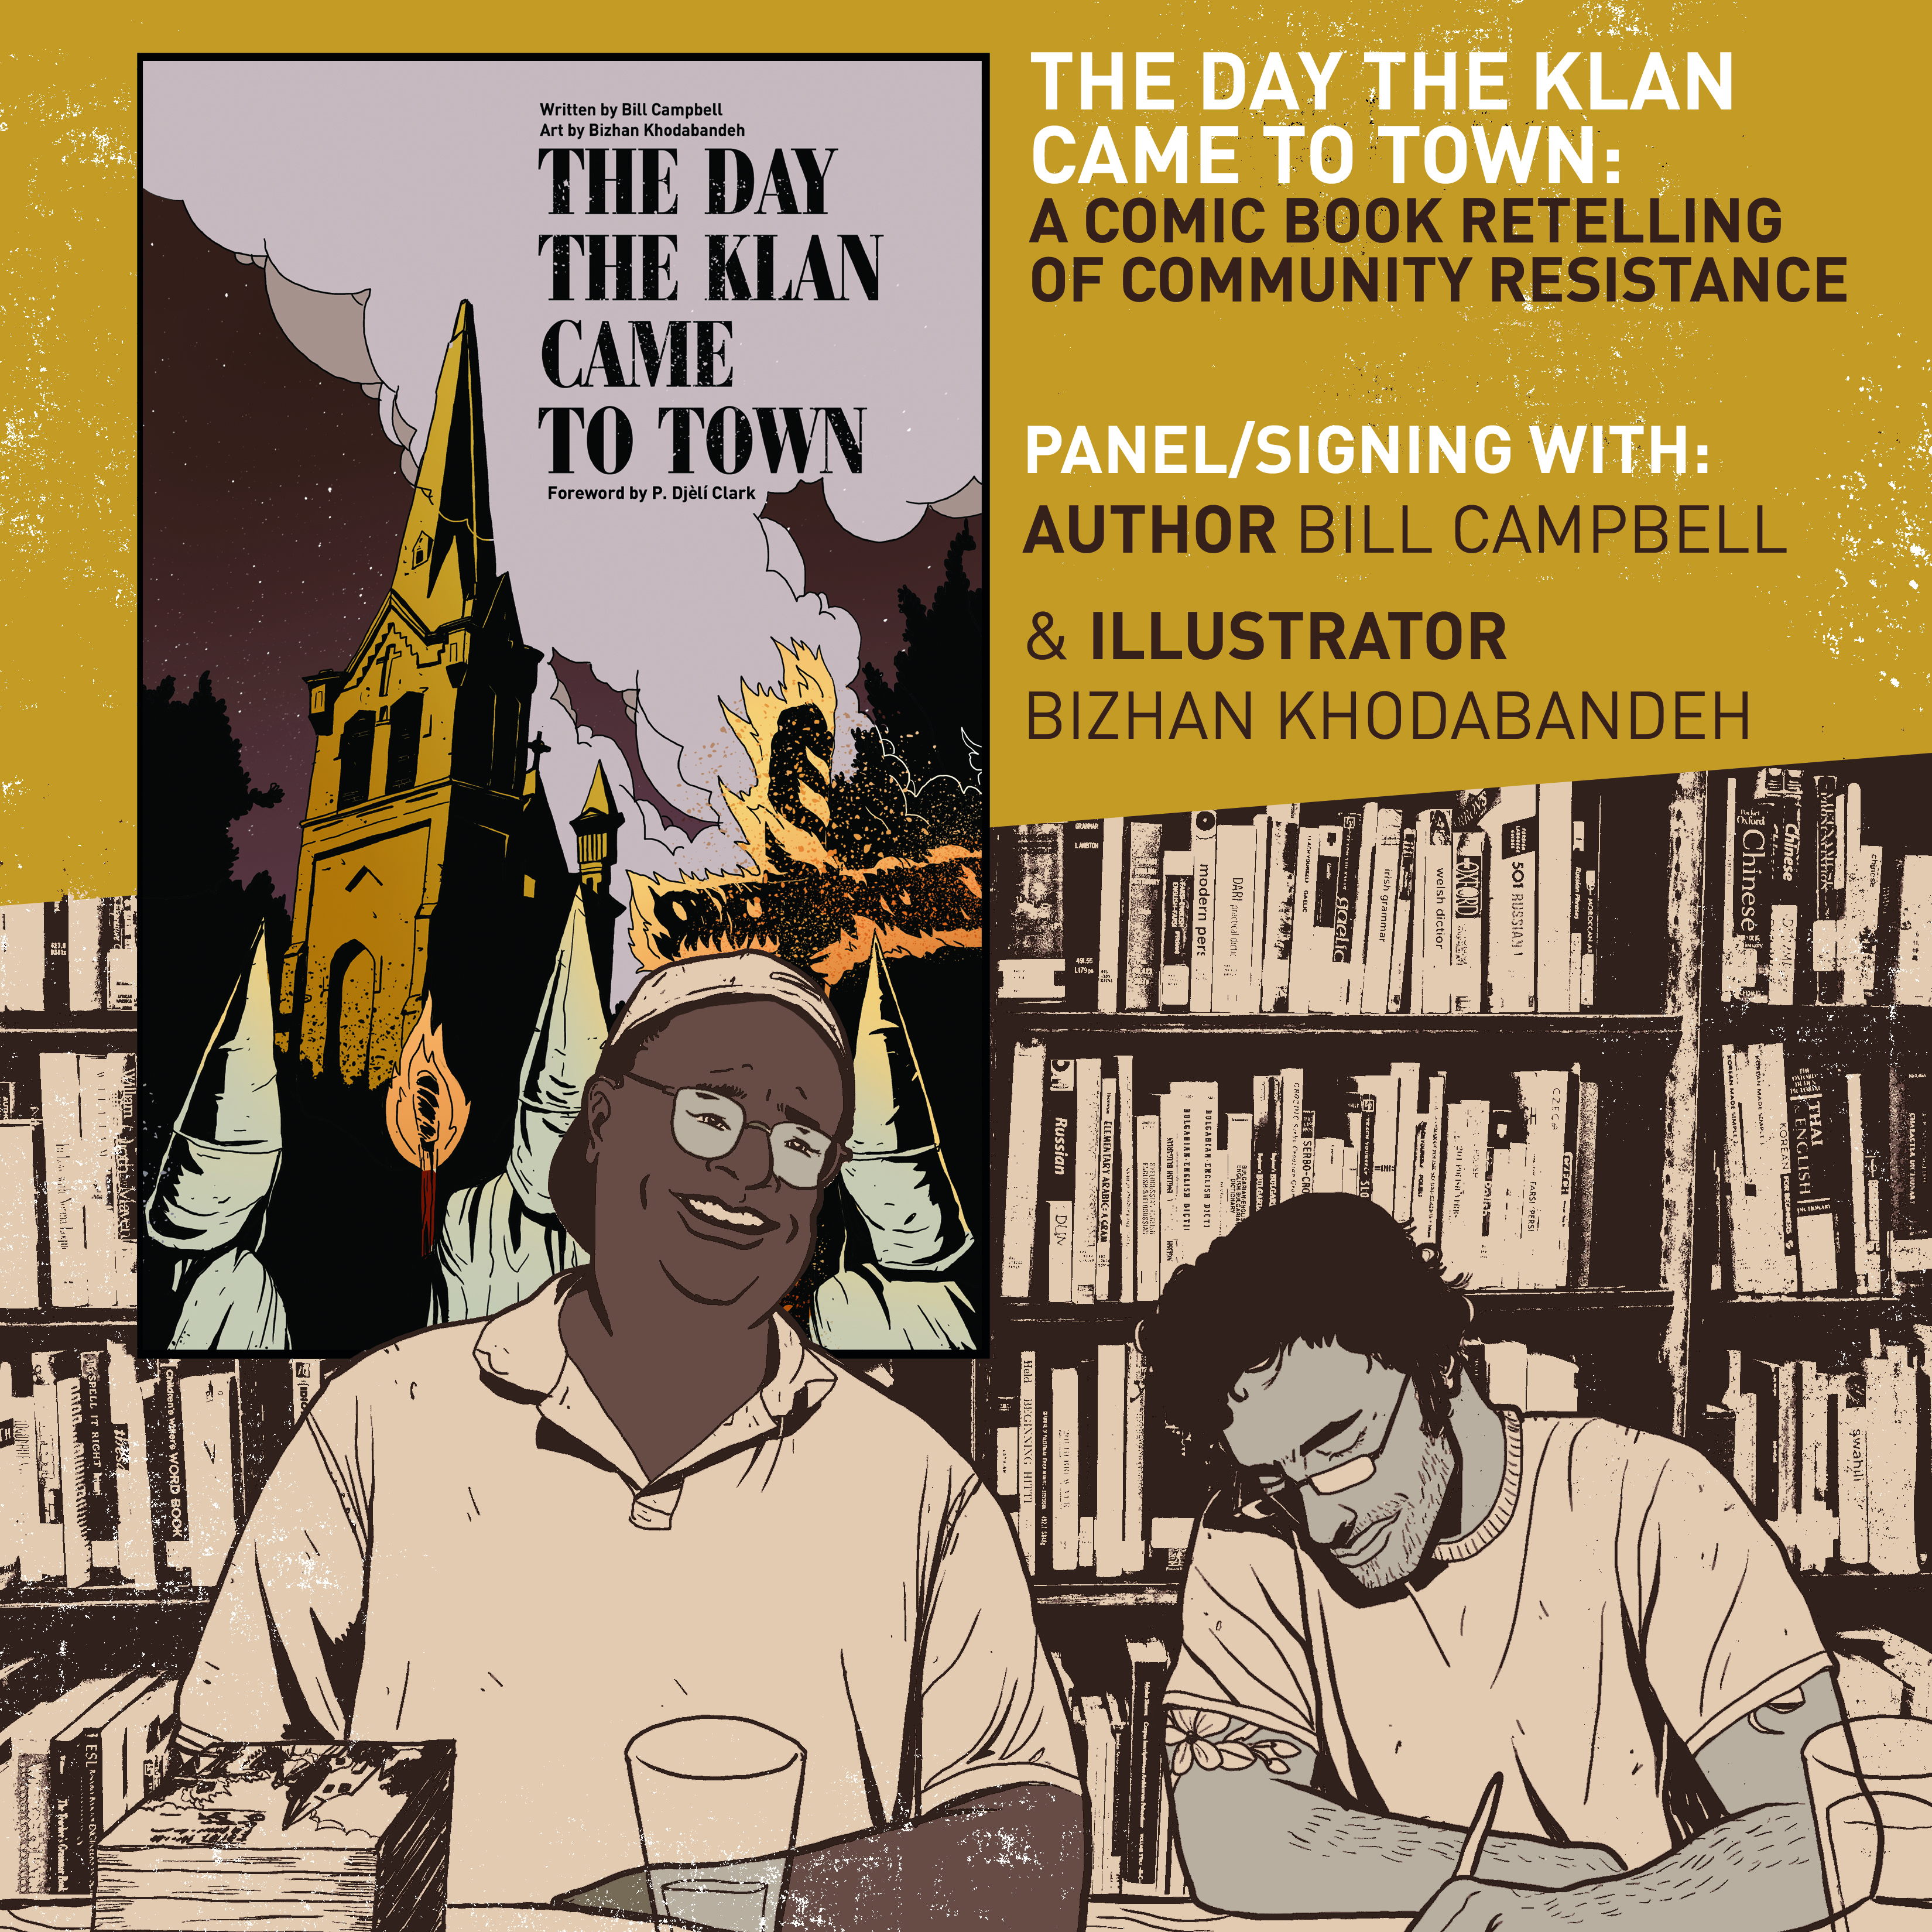 The Day the Klan Came to Town: A Comic Book Retelling of Community Resistance